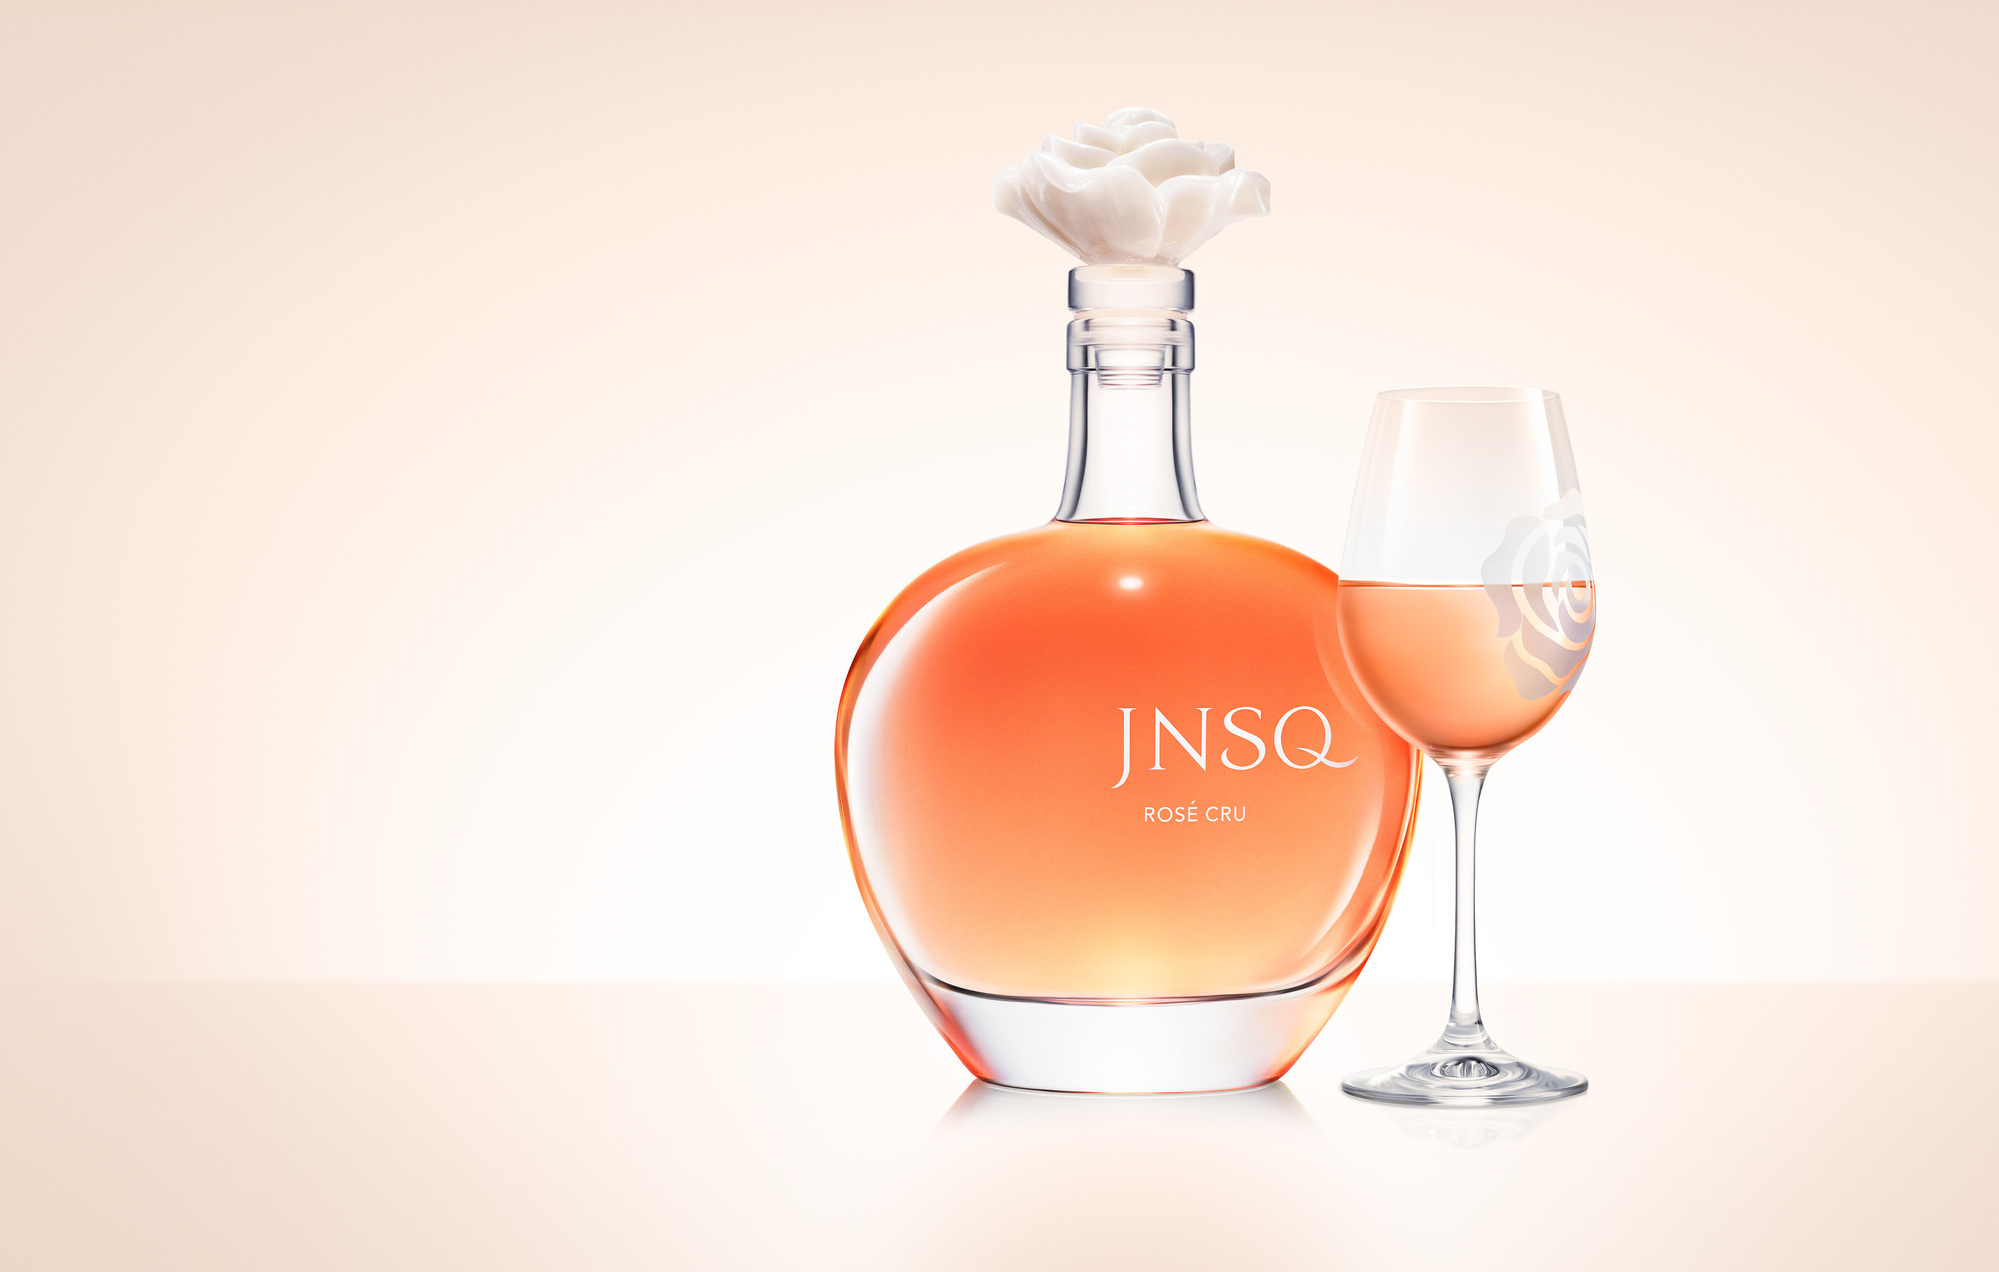 JNSQ wine bottle product and advertising photography by Timothy Hogan Studio in Los Angeles